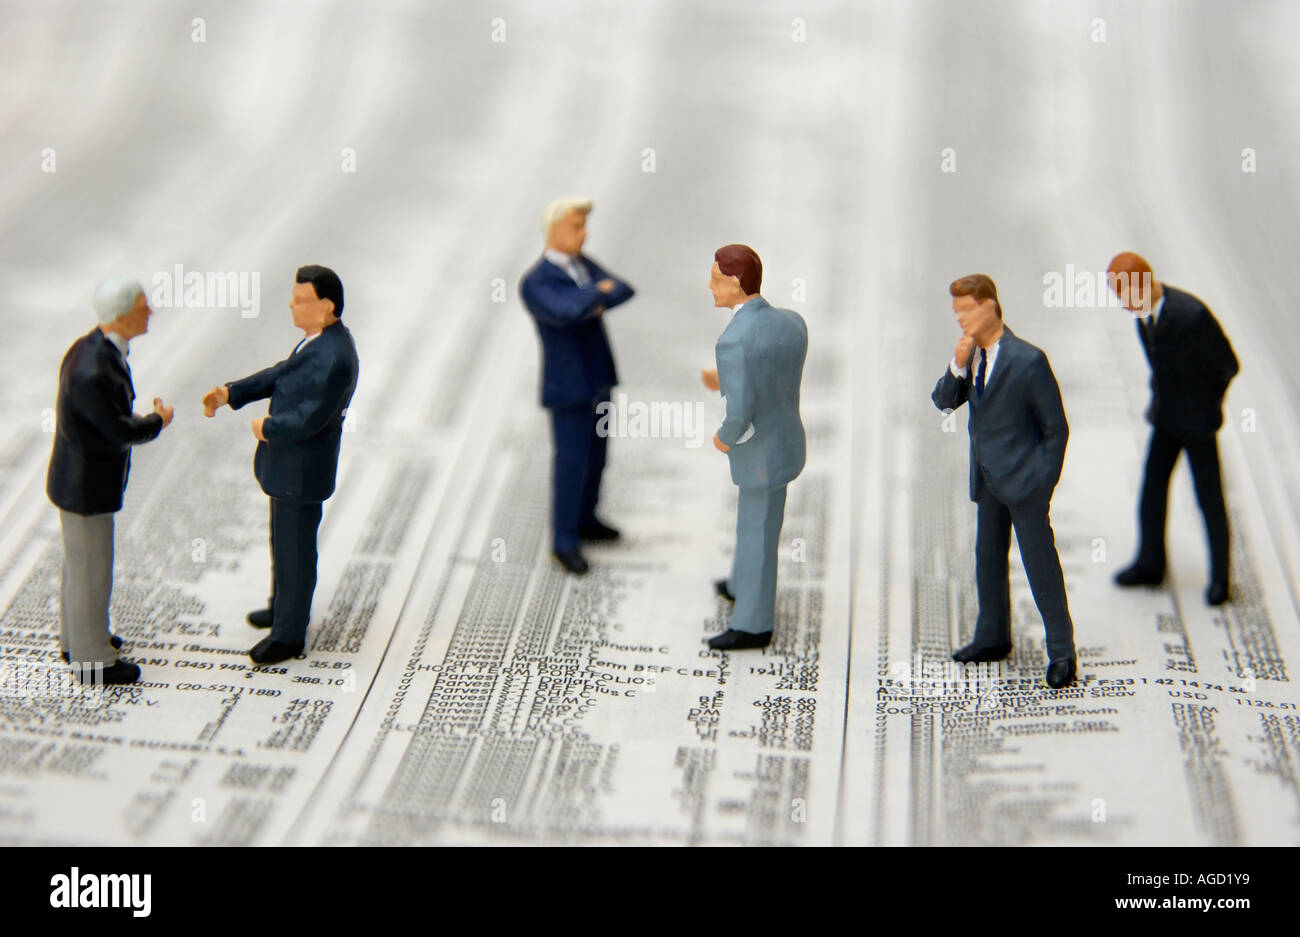 Stock market / Economy concept - business men standing on stock market stocks and shares prices Stock Photo